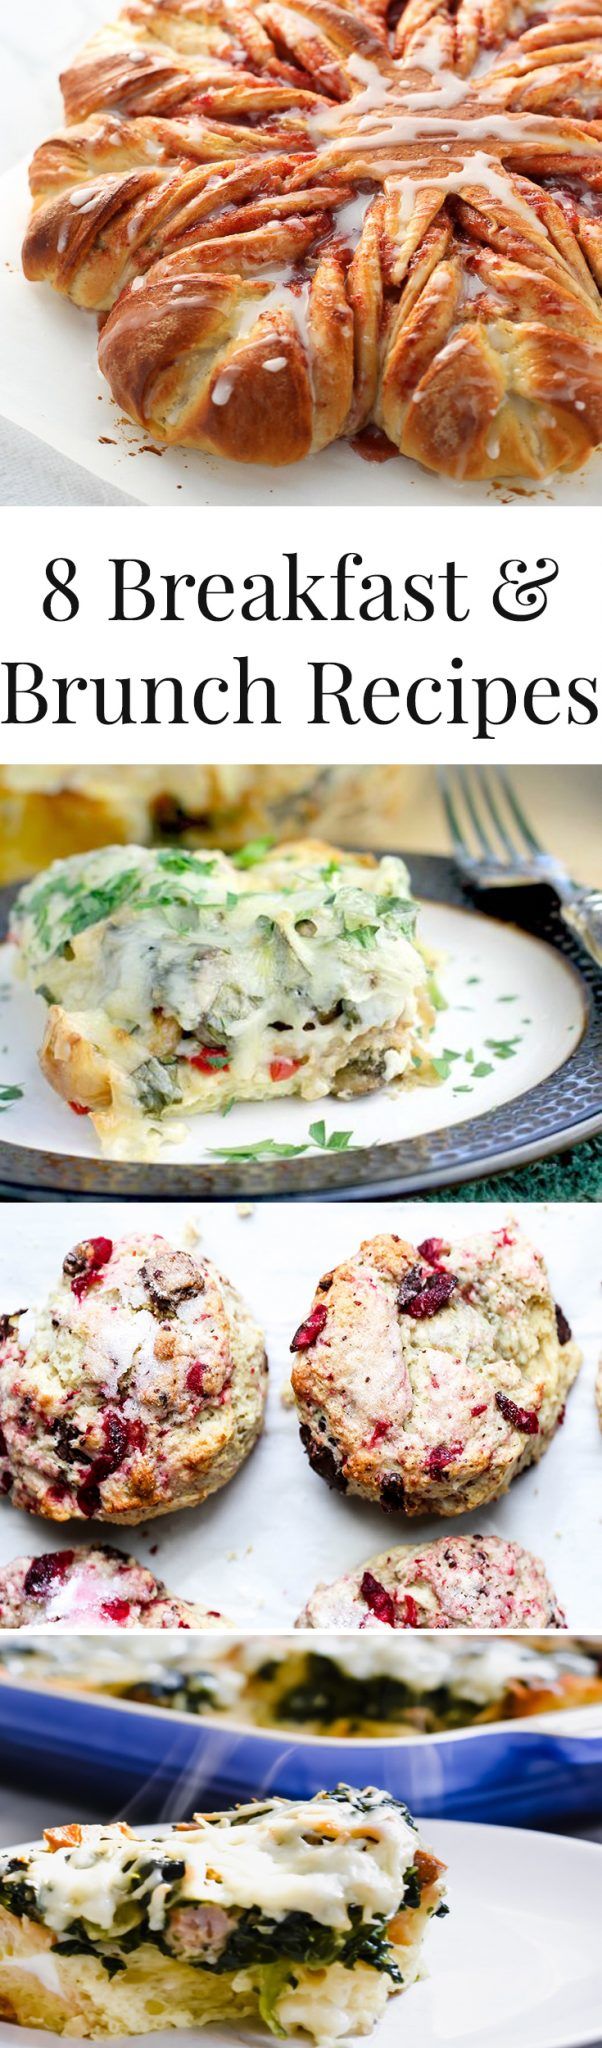 A round-up of Brunch and Breakfast Recipes for the upcoming Holidays from some of my favorite food bloggers and recipe sites. #Recipes #Breakfast Recipes #Brunch Recipes #Make ahead Breakfast Recipes #Make ahead Brunch Recipes